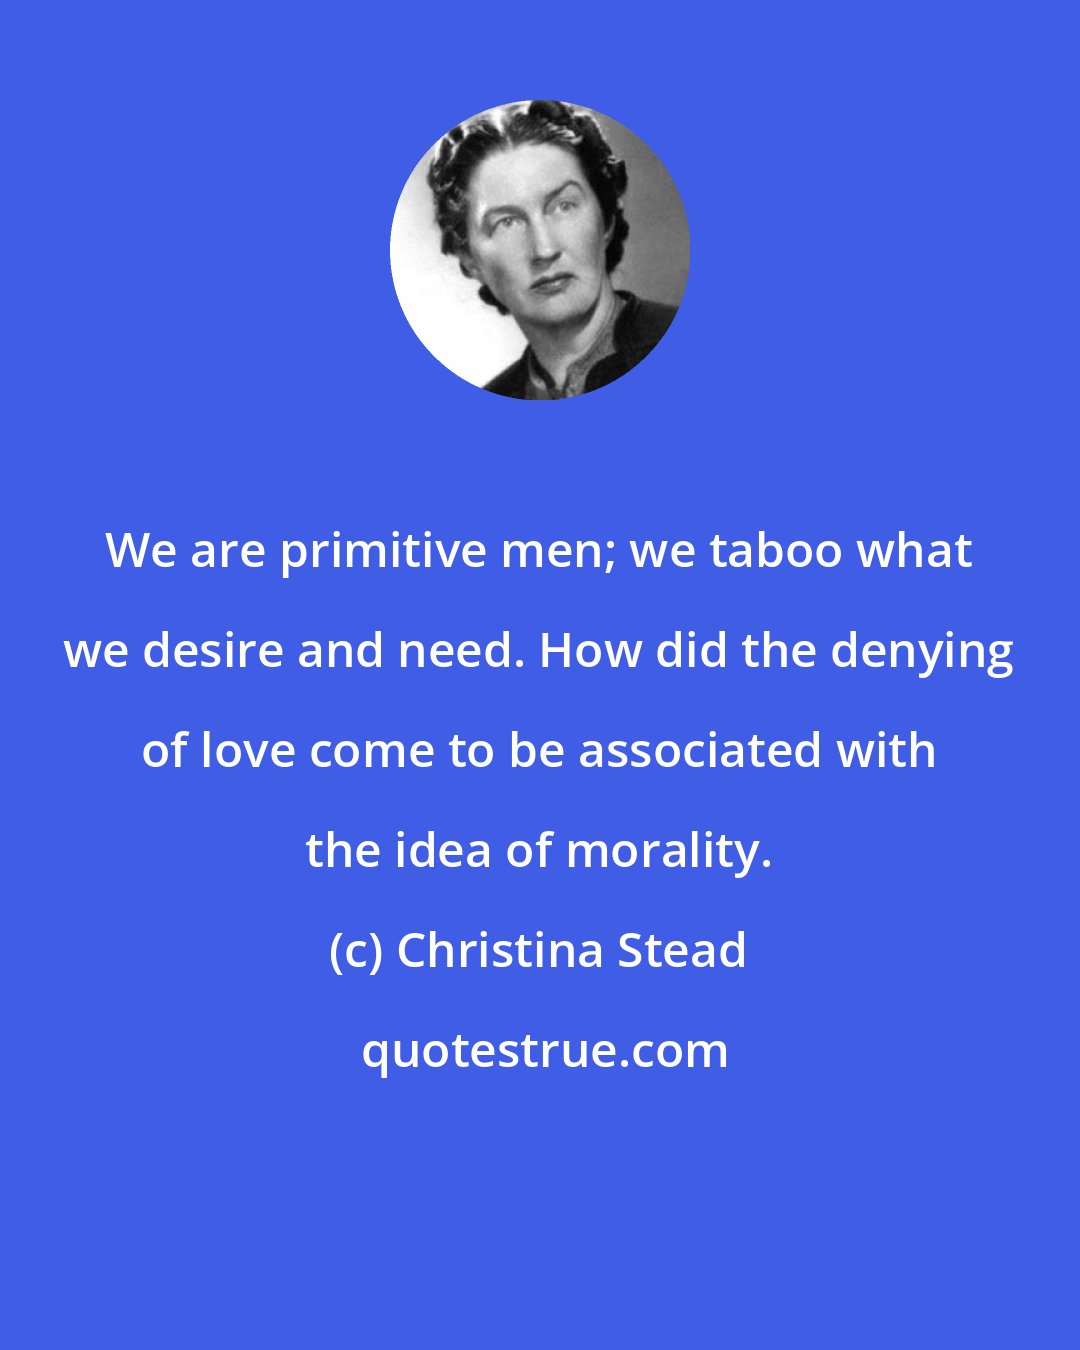 Christina Stead: We are primitive men; we taboo what we desire and need. How did the denying of love come to be associated with the idea of morality.